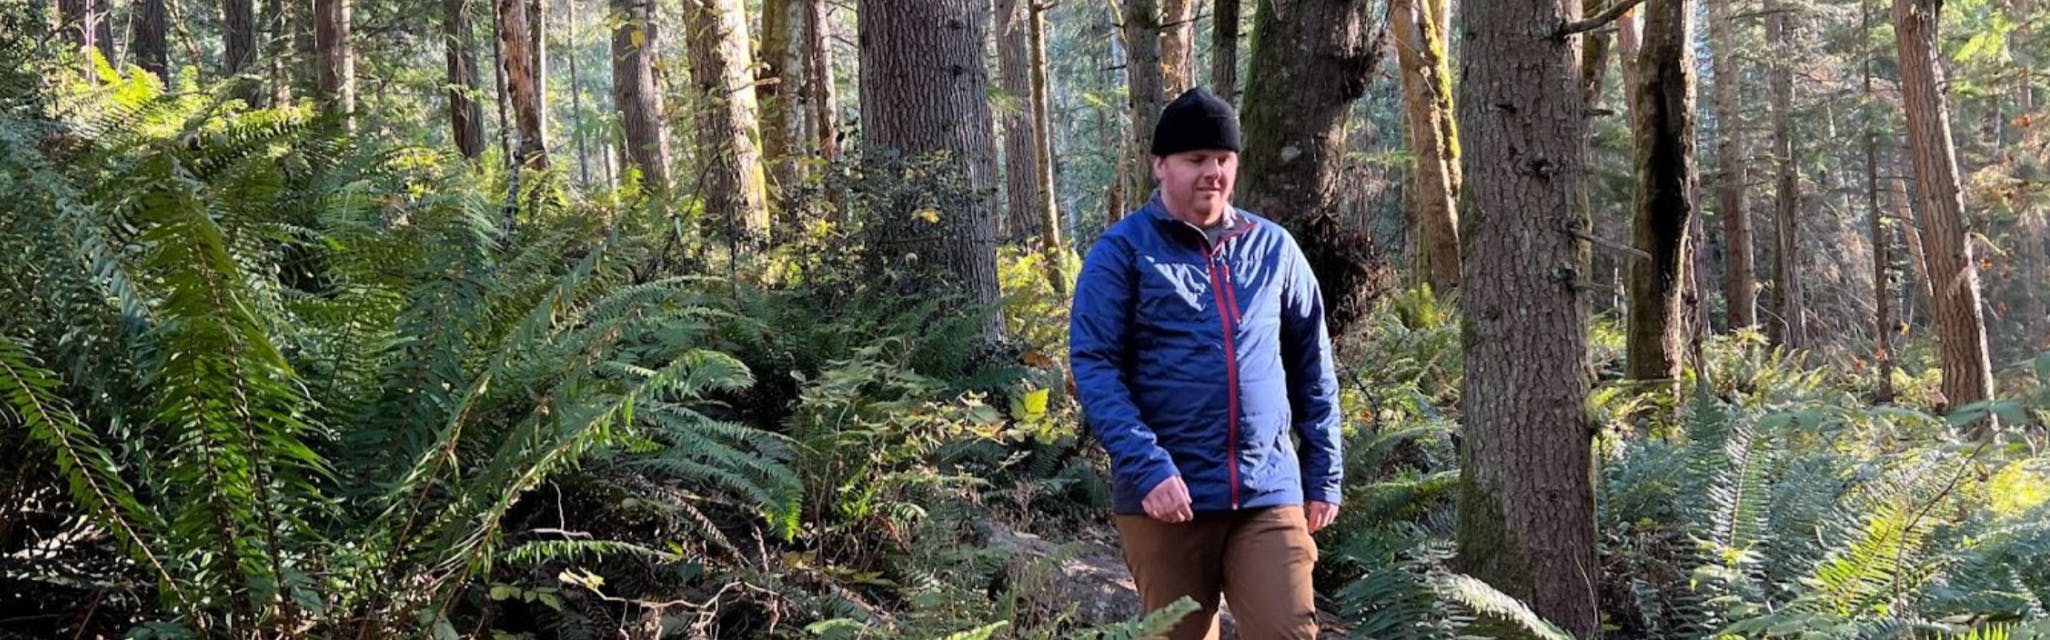 A man walking through the forest in the Spyder Glissade Jacket.